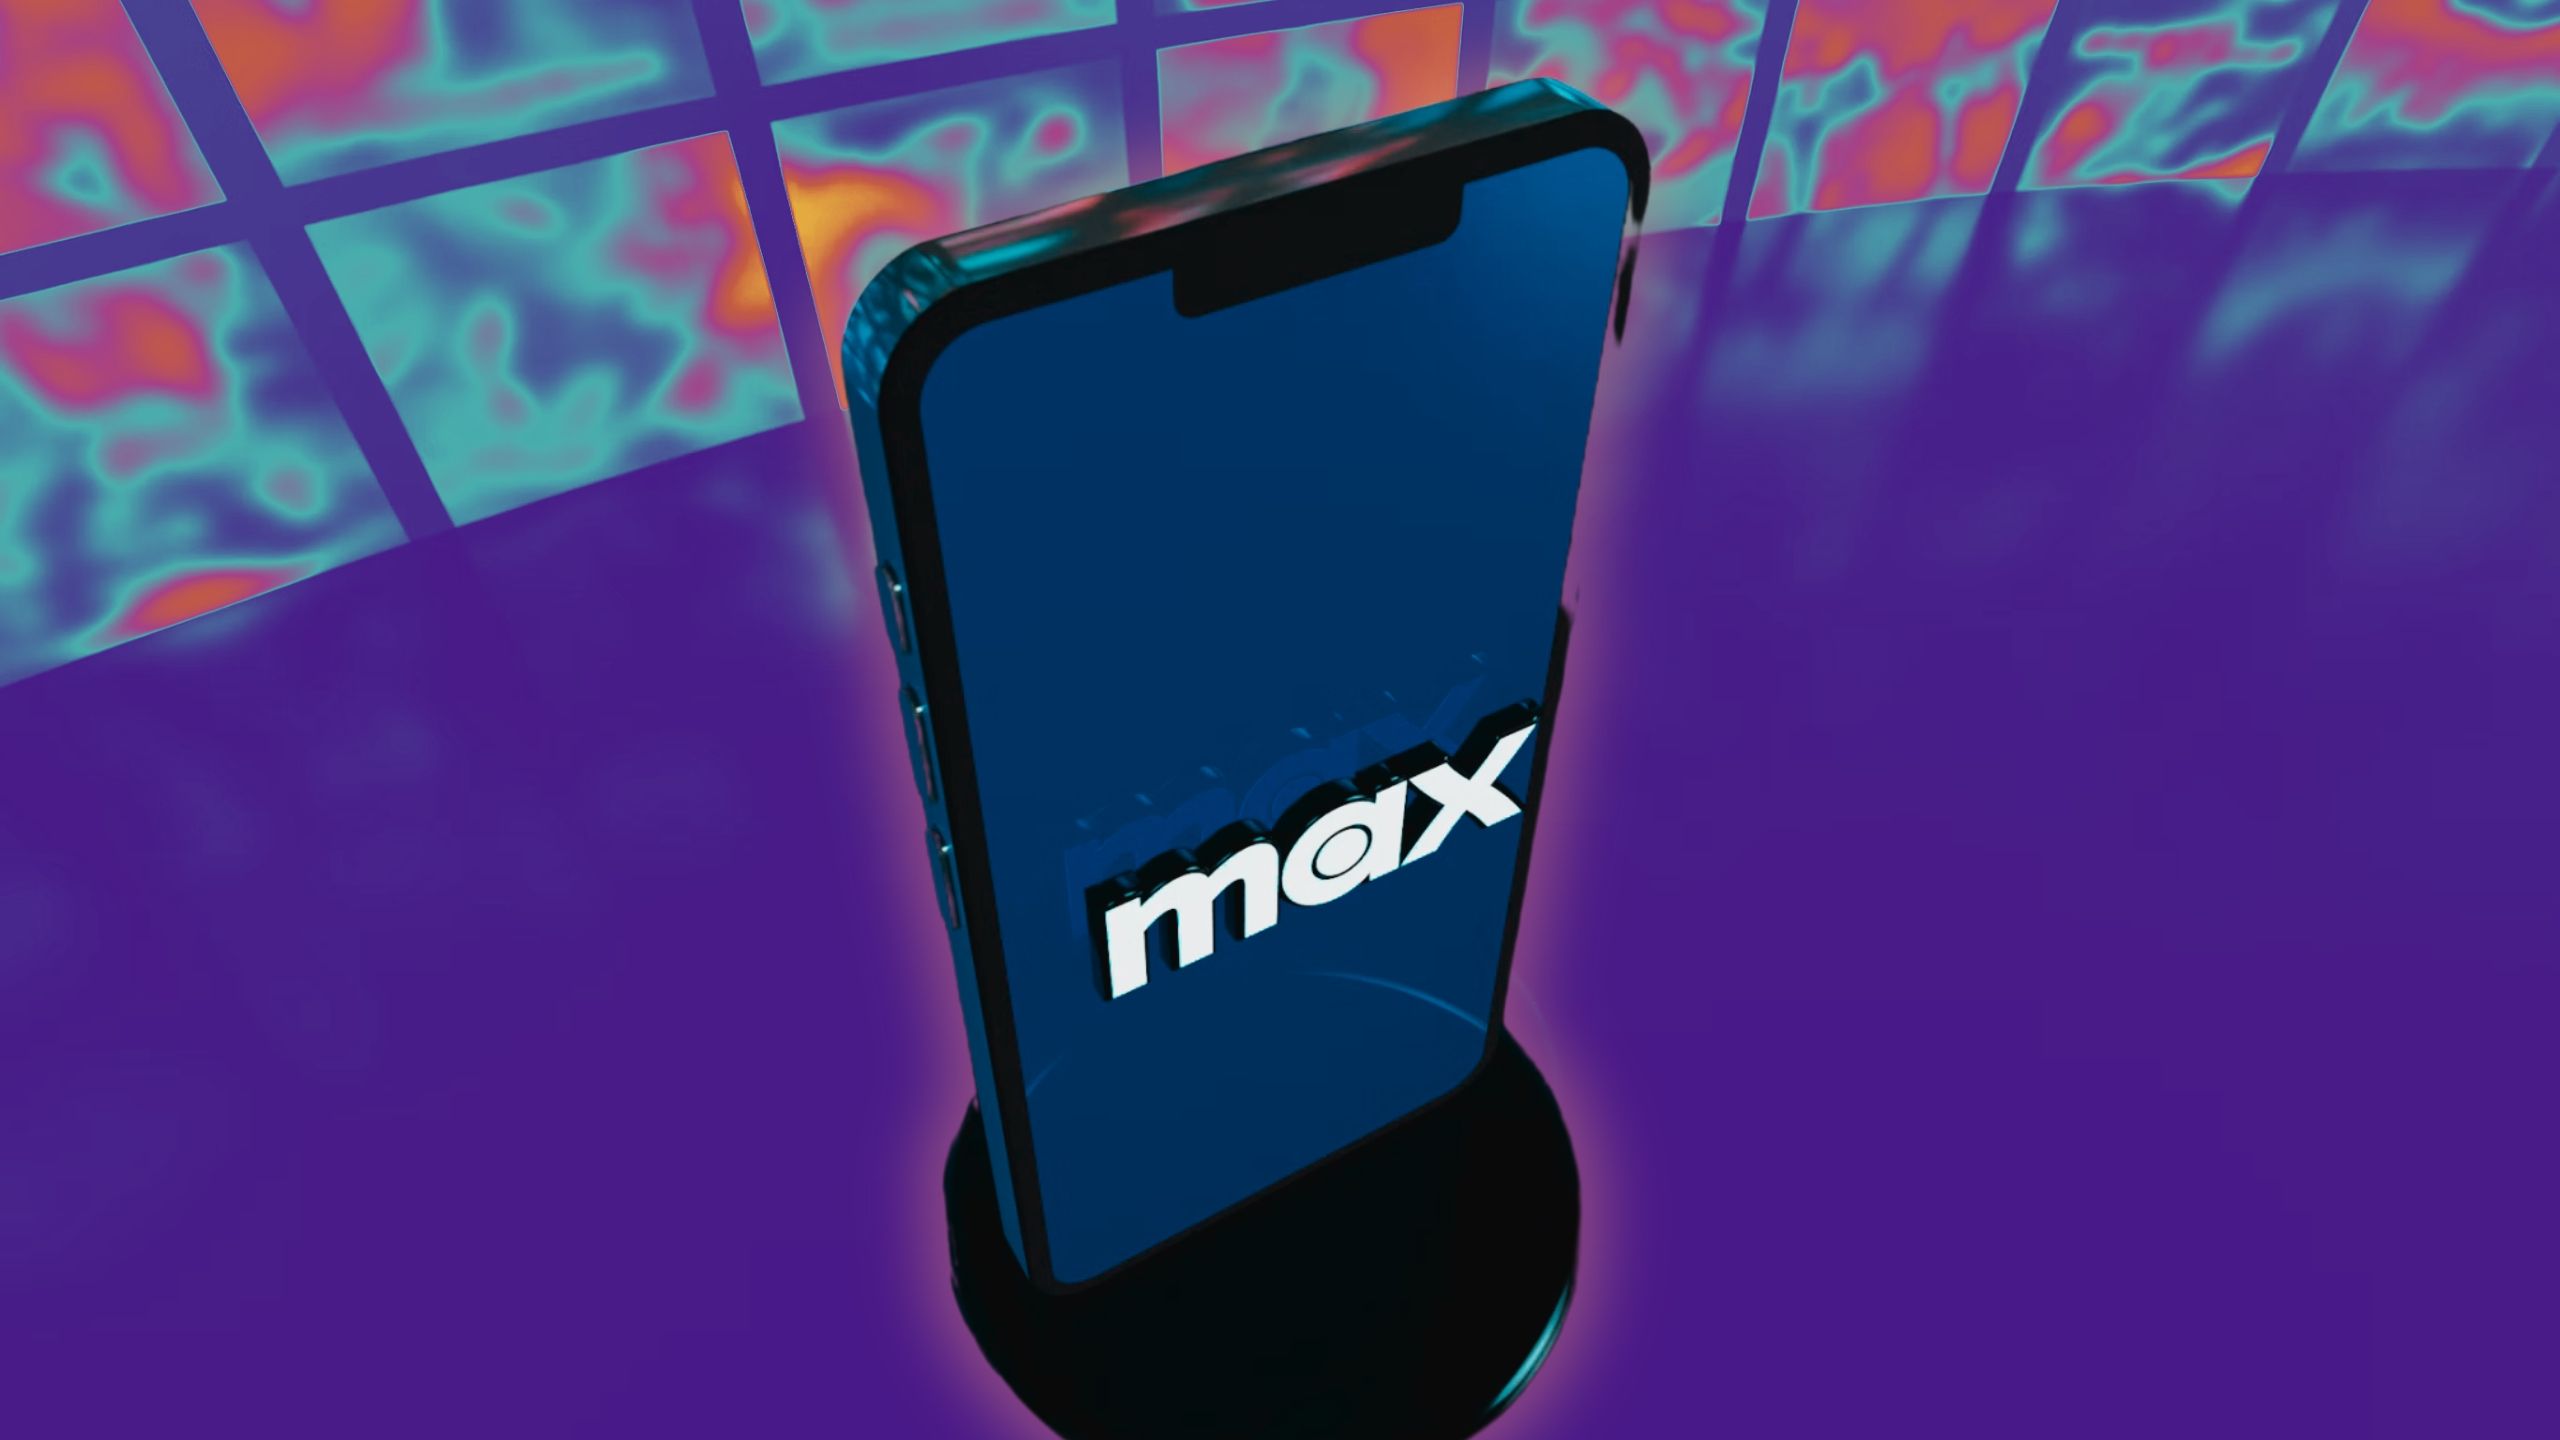 Max streaming service on an iPhone